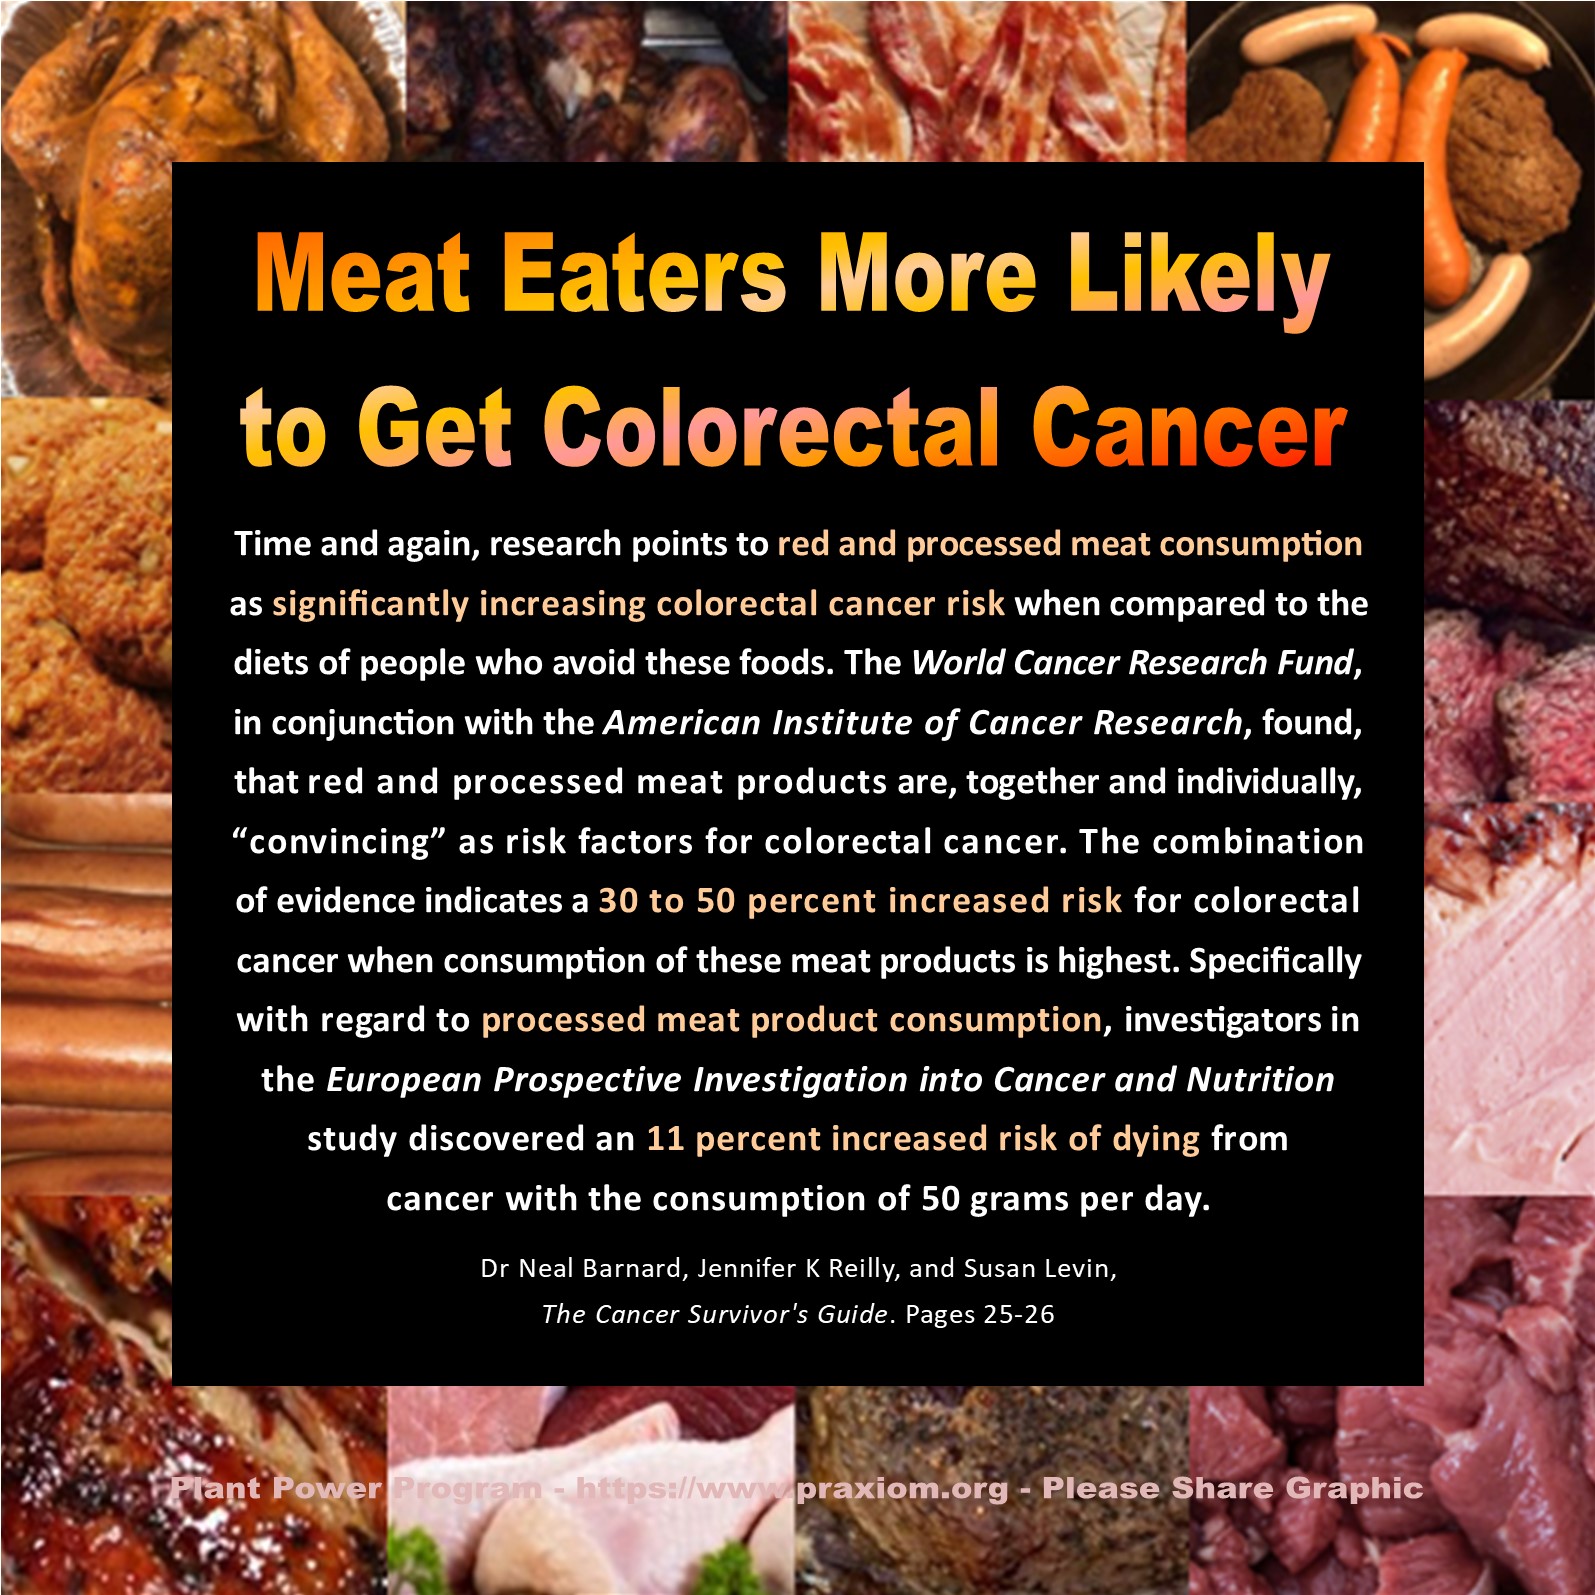 Meat Eaters More Likely to Get Colorectal Cancer - Dr Neal Barnard